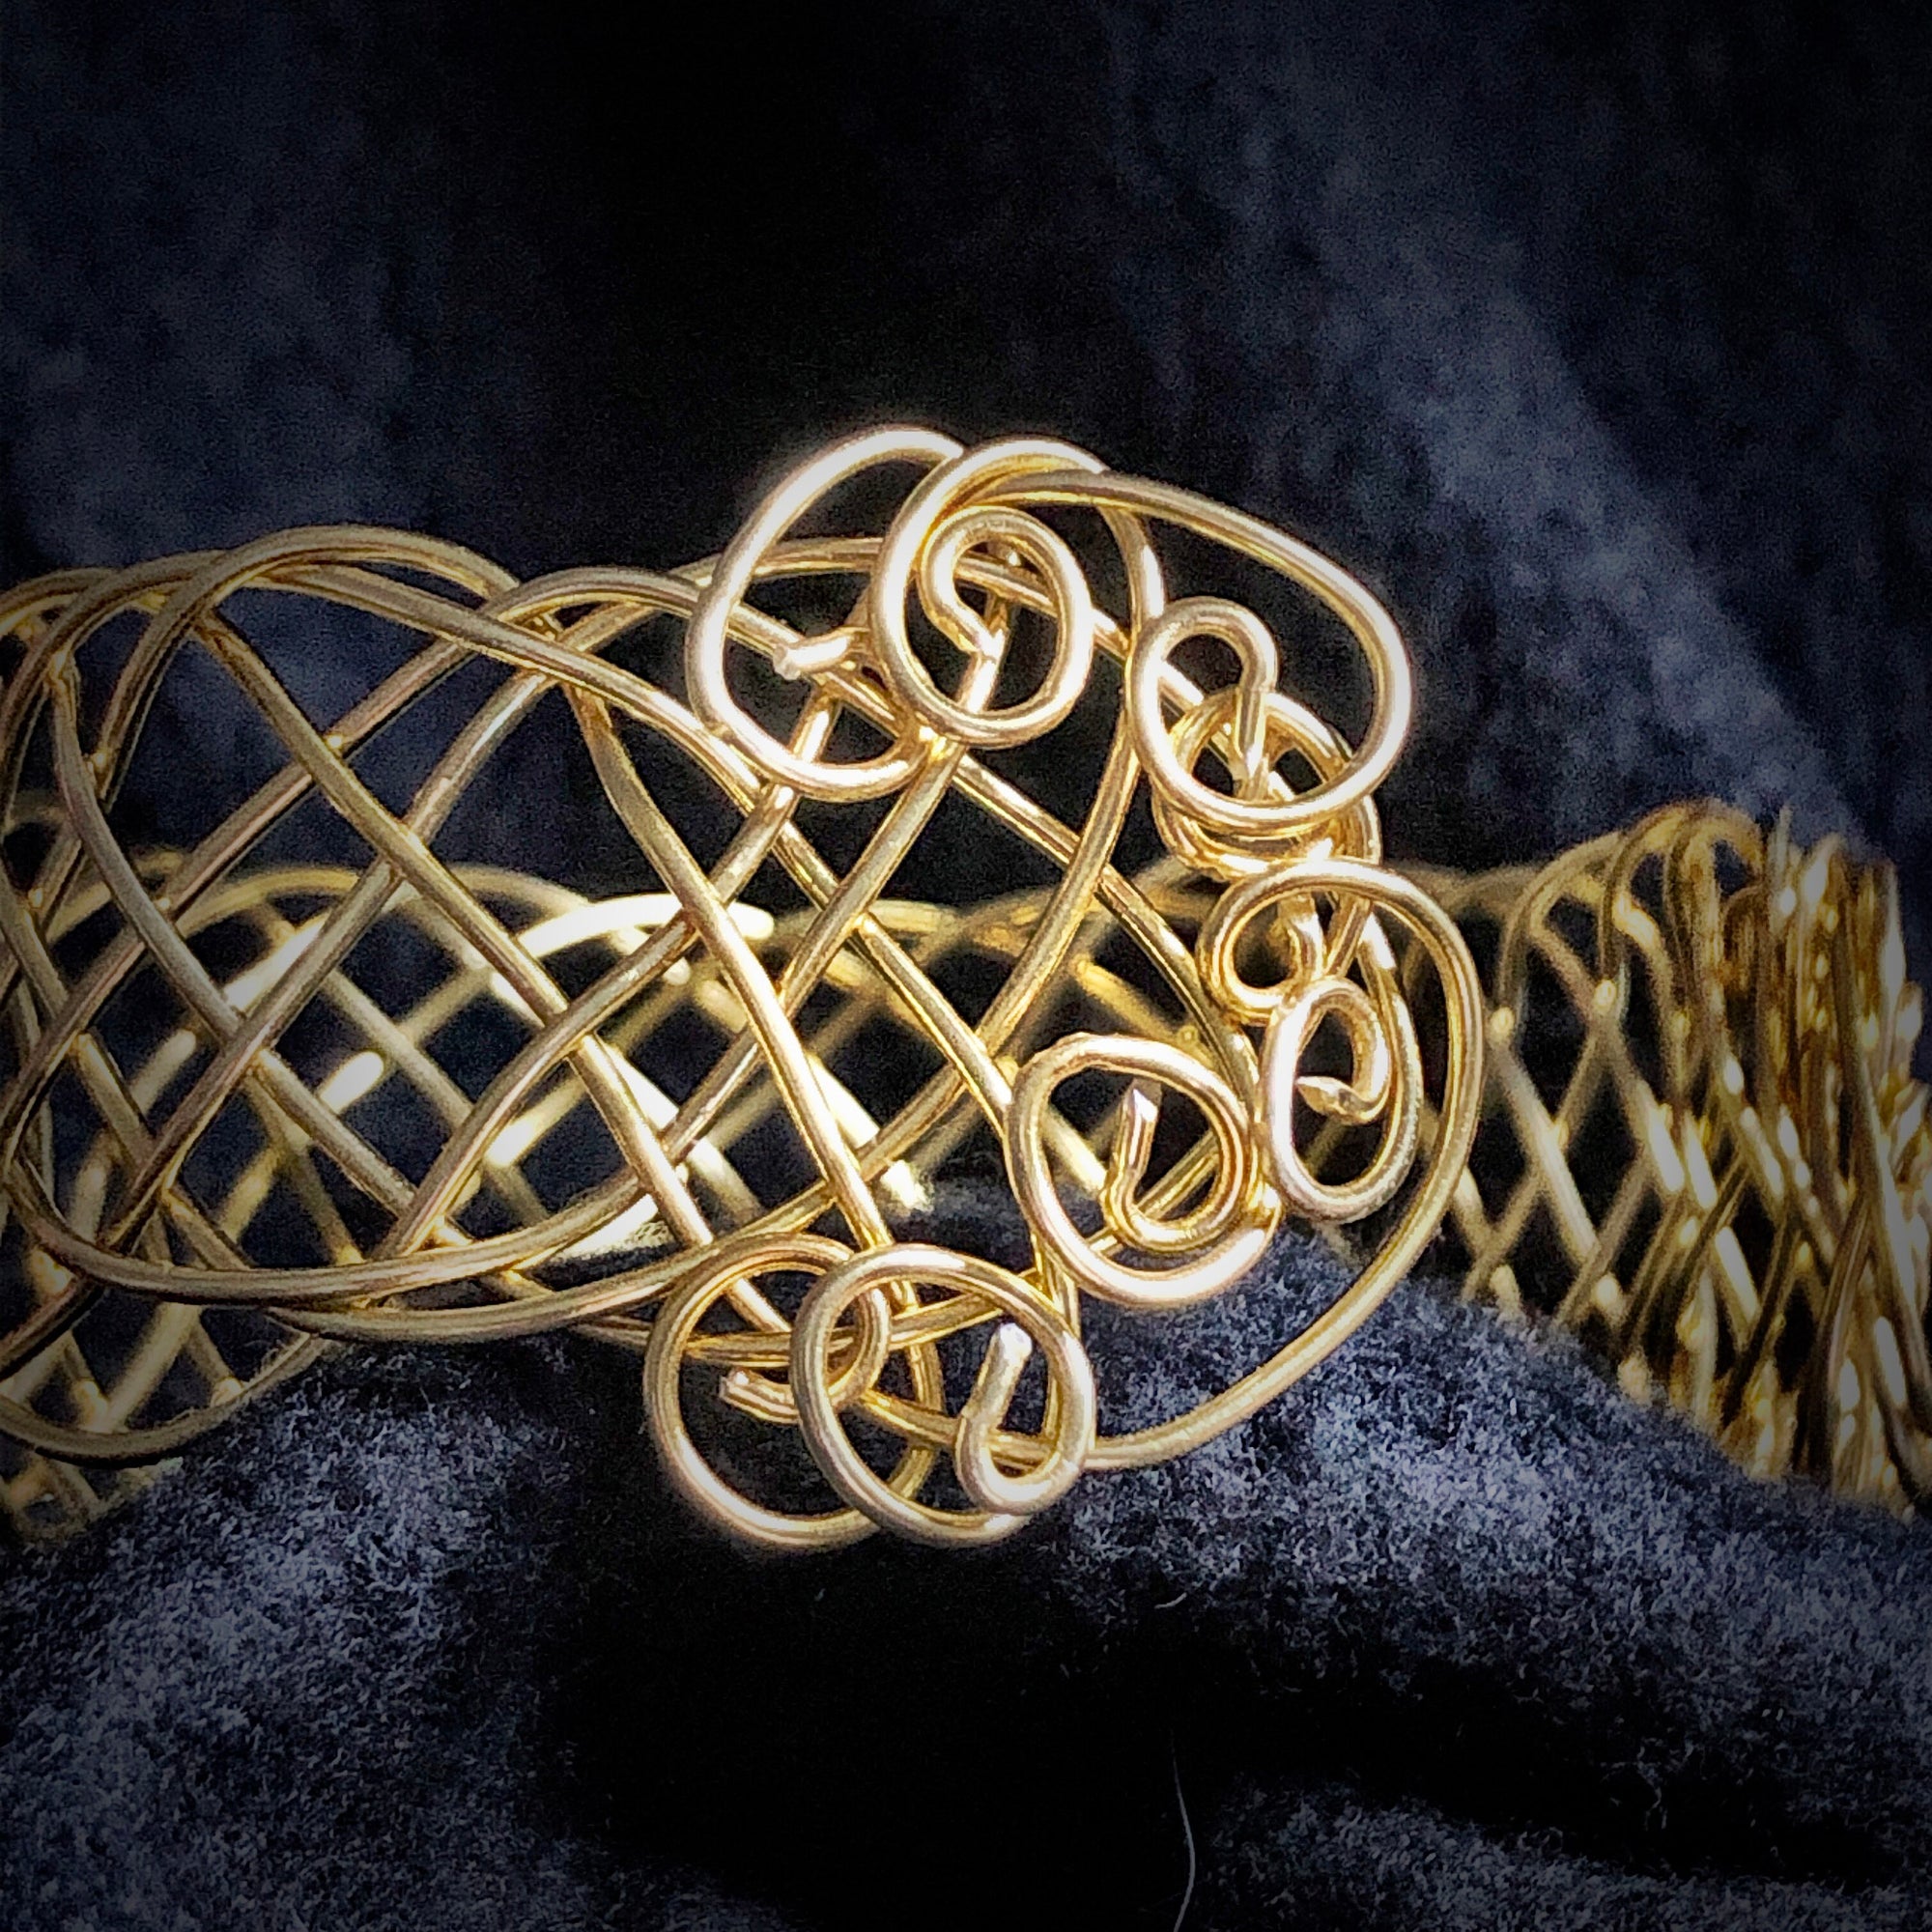 Viking weave braided bracelet in gold, silver or copper - Adjustable cuff